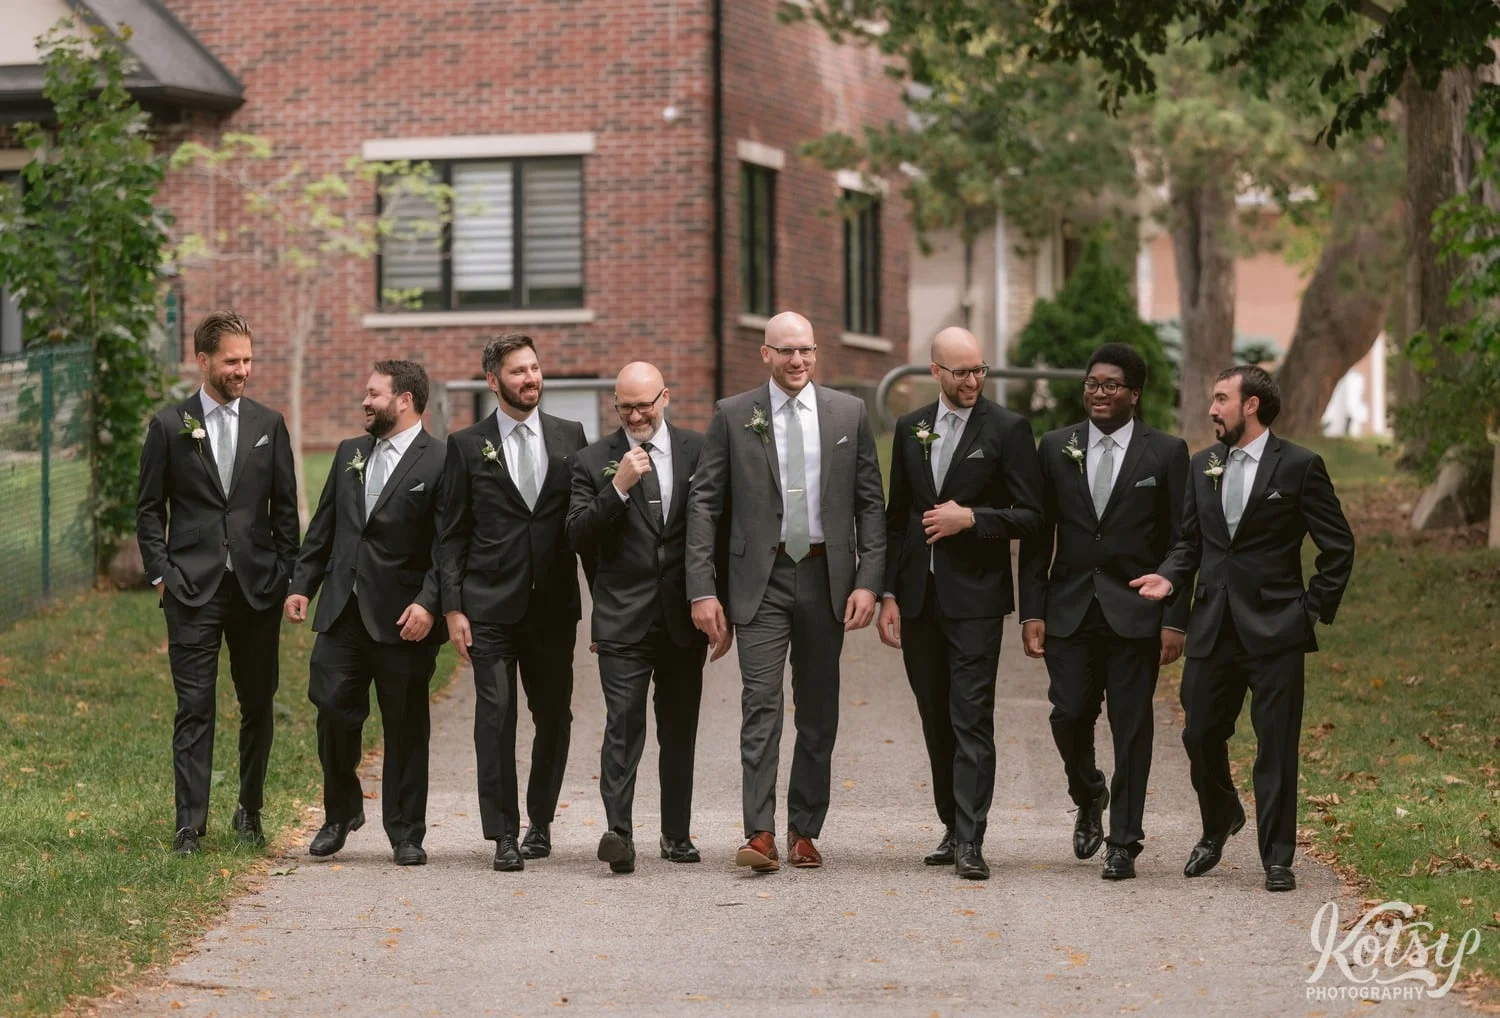 A group of groomsmen and groom walk towards the camera on a path at West Deane Park in Toronto, Canada